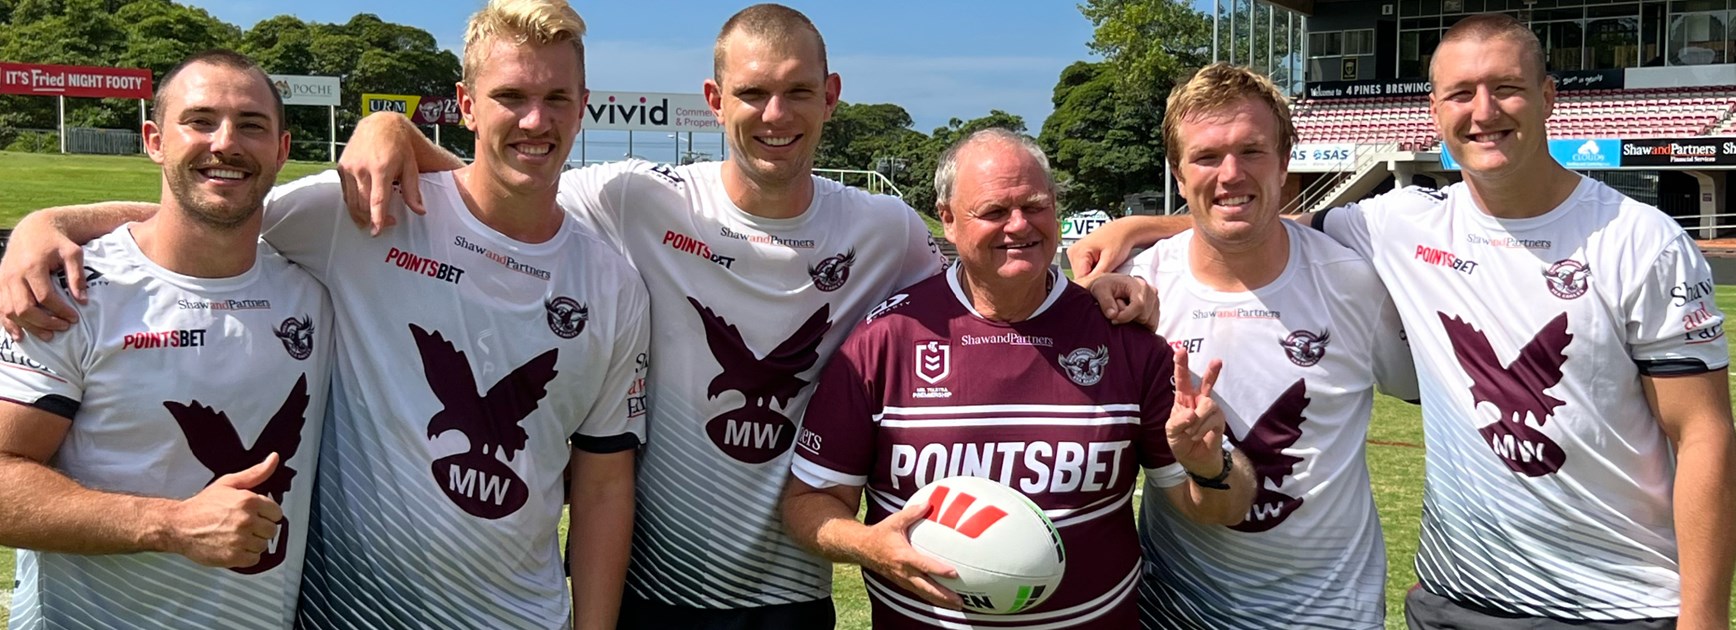 Sea Eagles and What Ability - a winning team